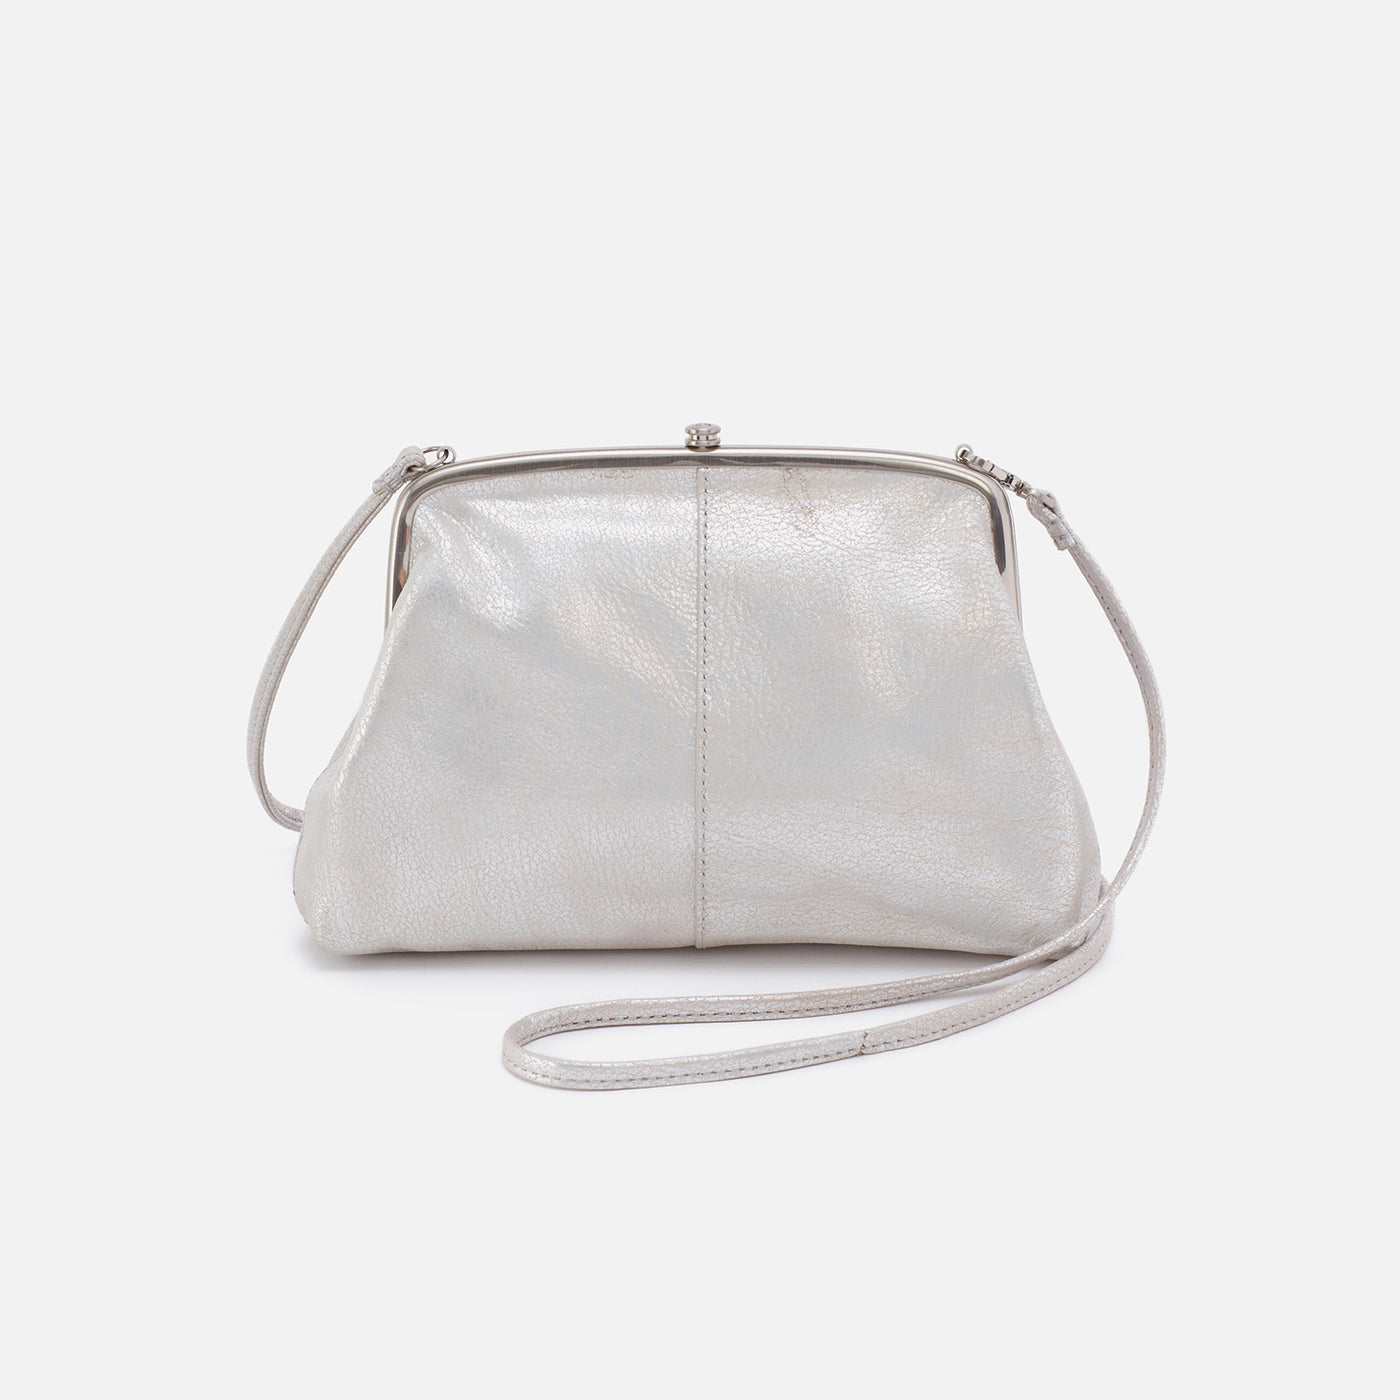 HOBO Chosen Baguette Style Bag - Metallic Leather Pearled Silver